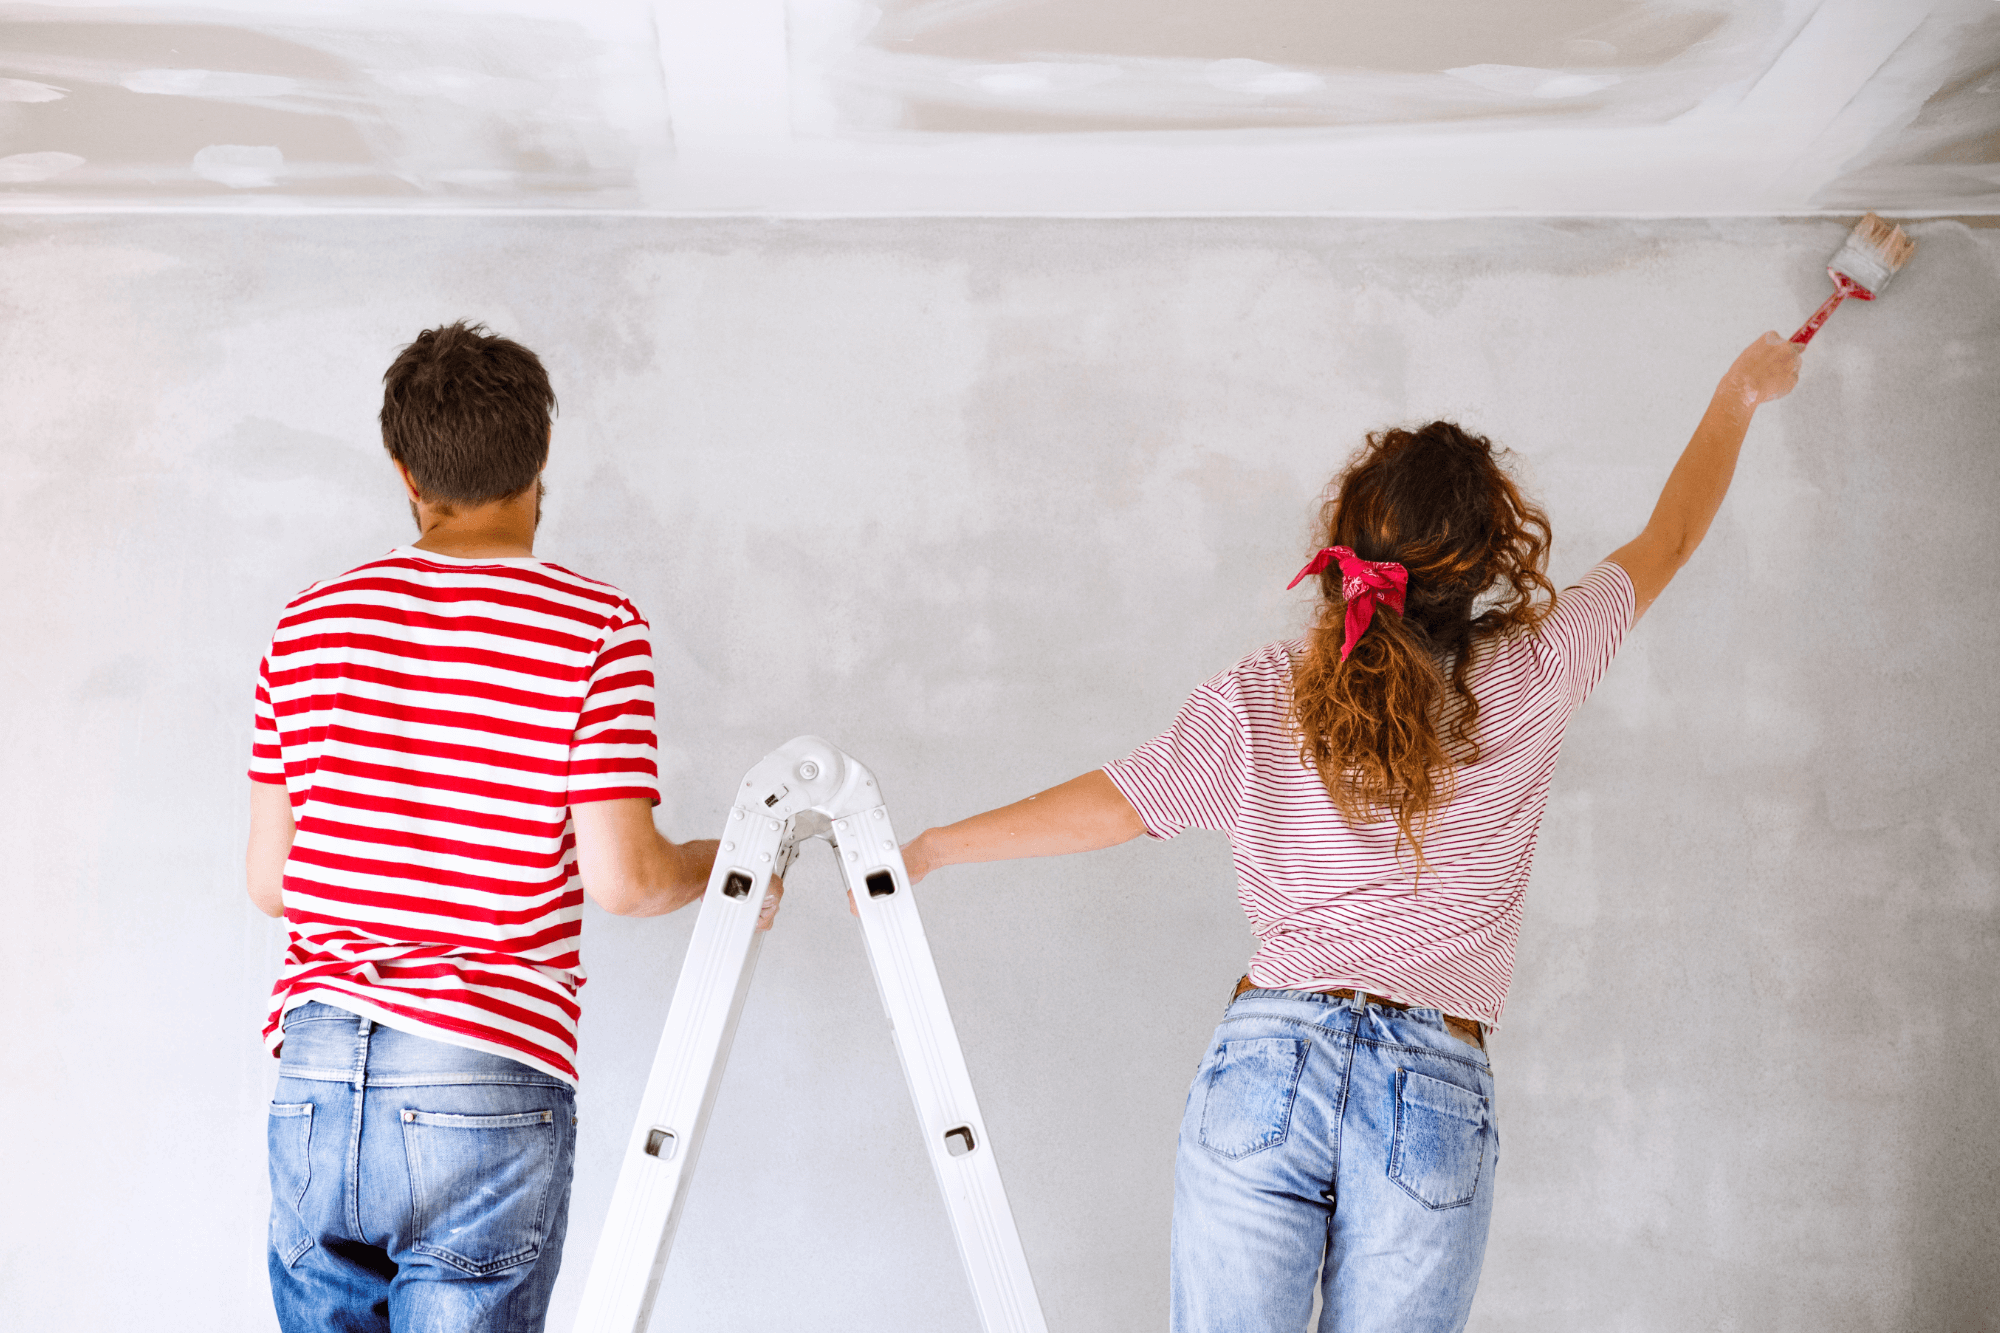 Man and woman standing on ladder painting walls of room